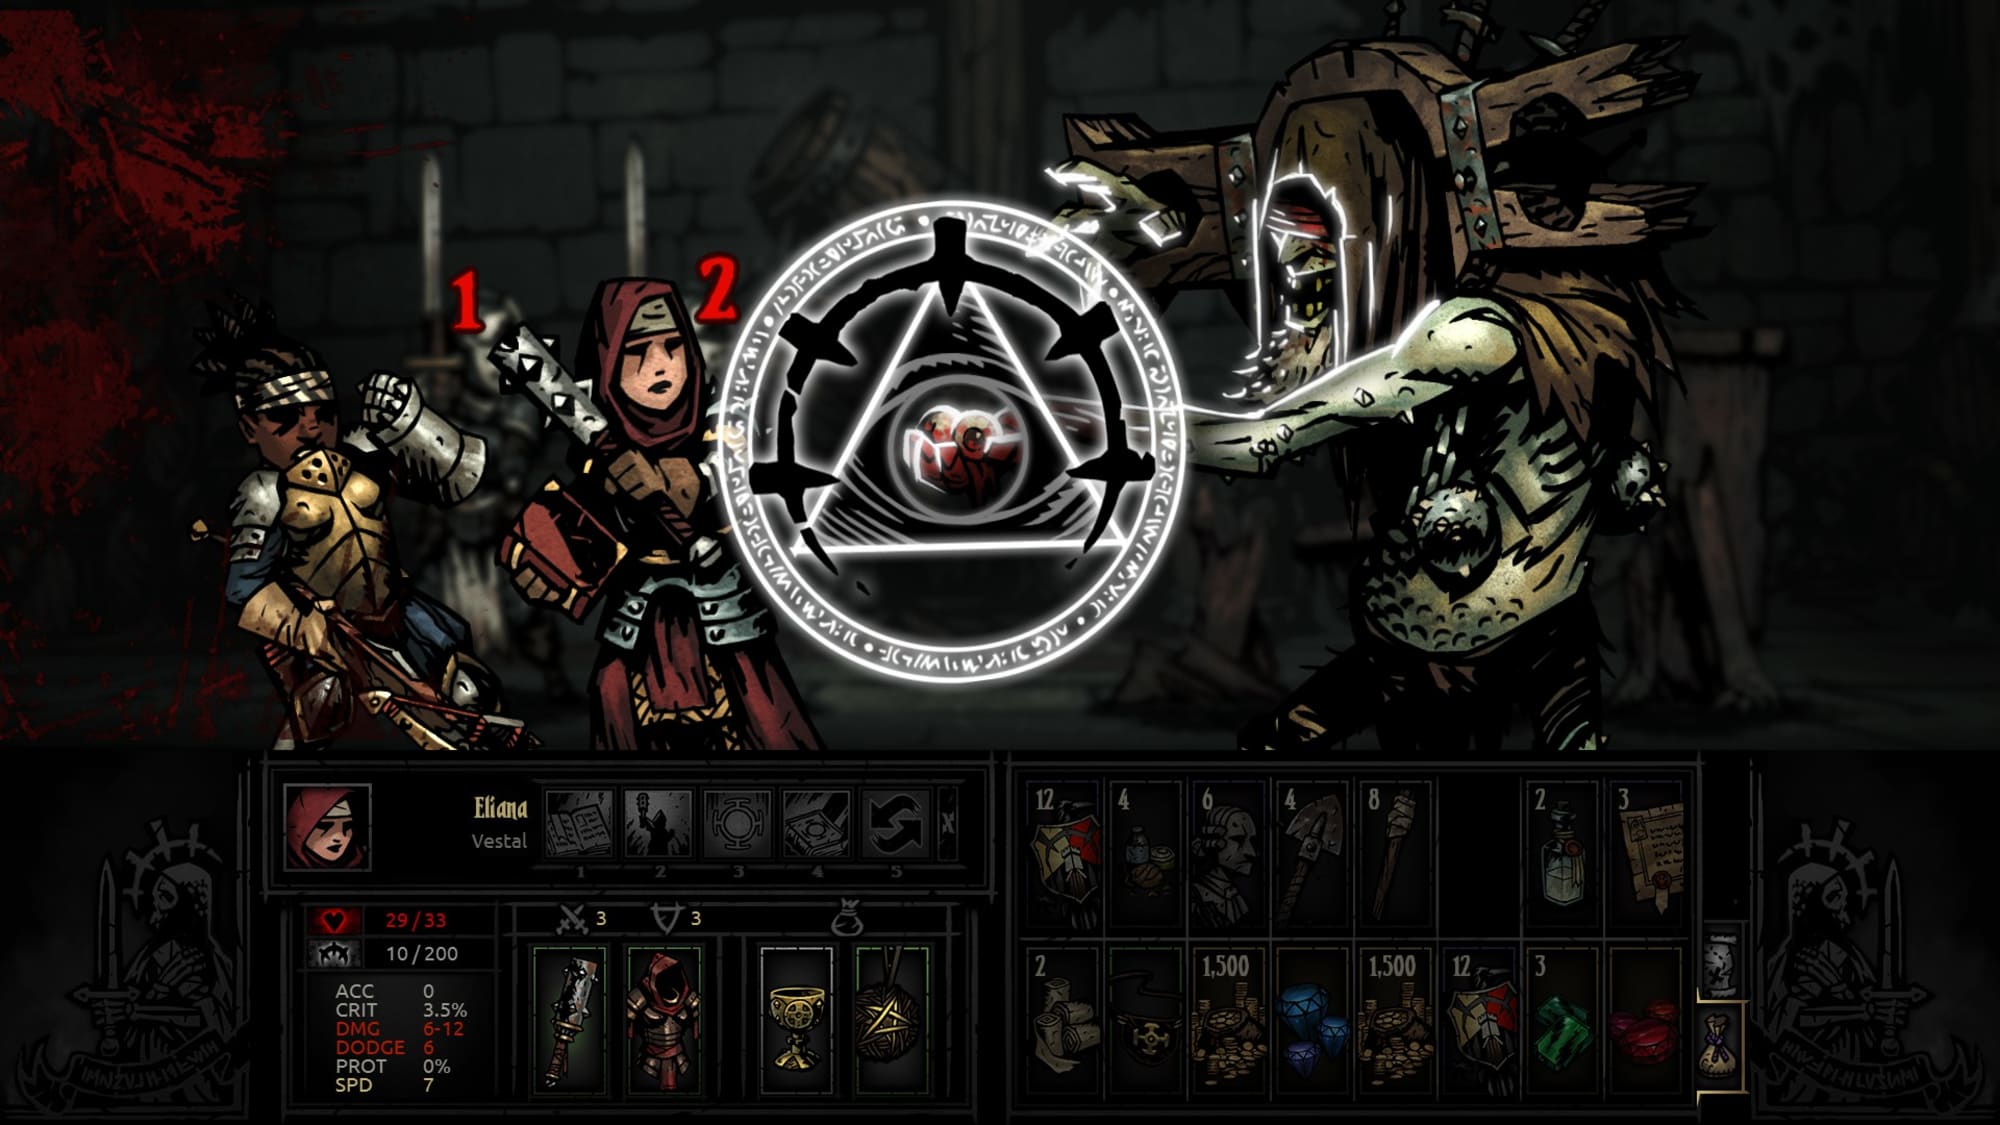 darkest dungeon switch color of madness